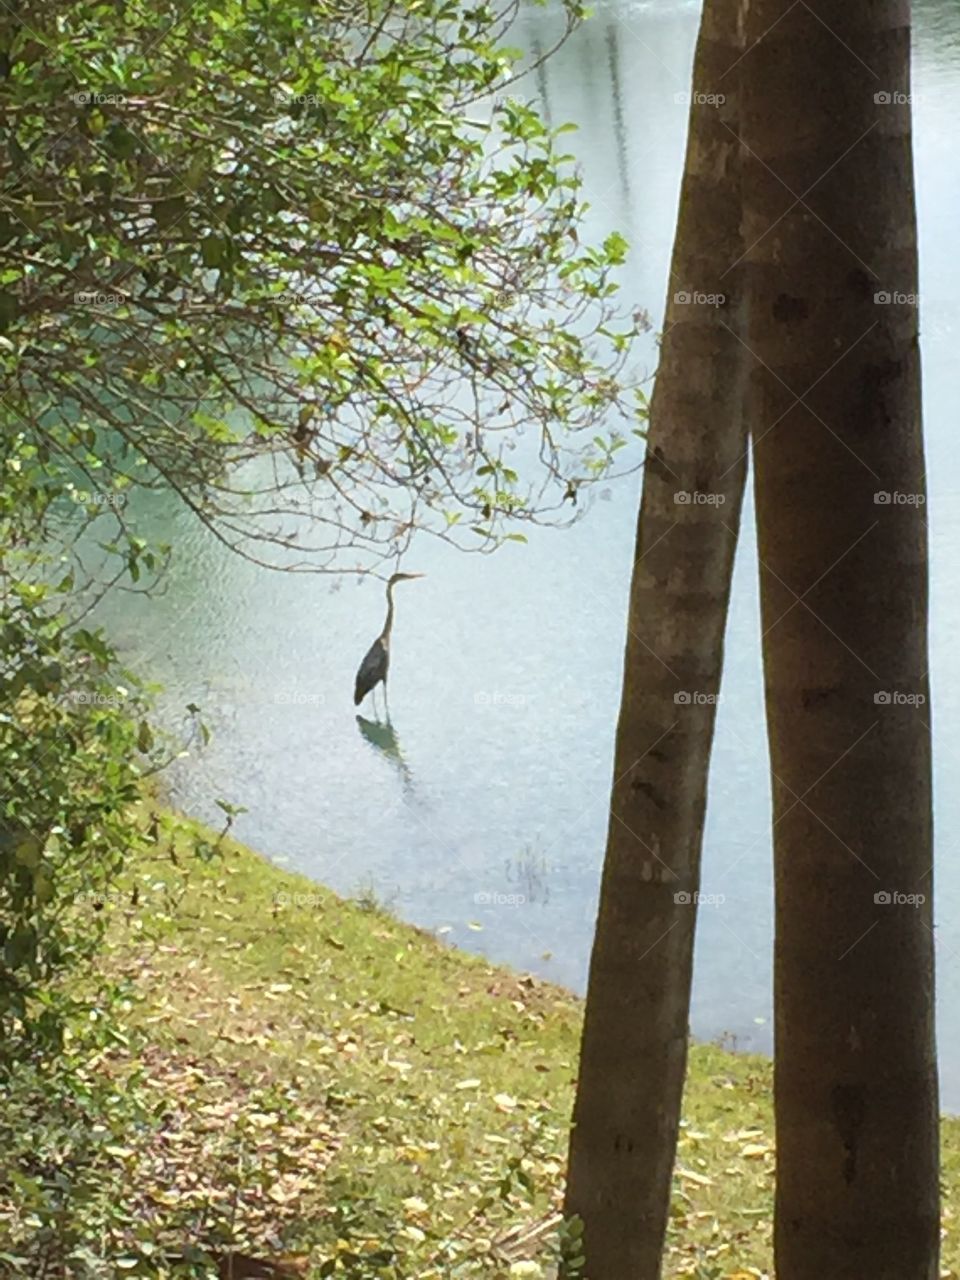 A crane on Florida that I was watching 